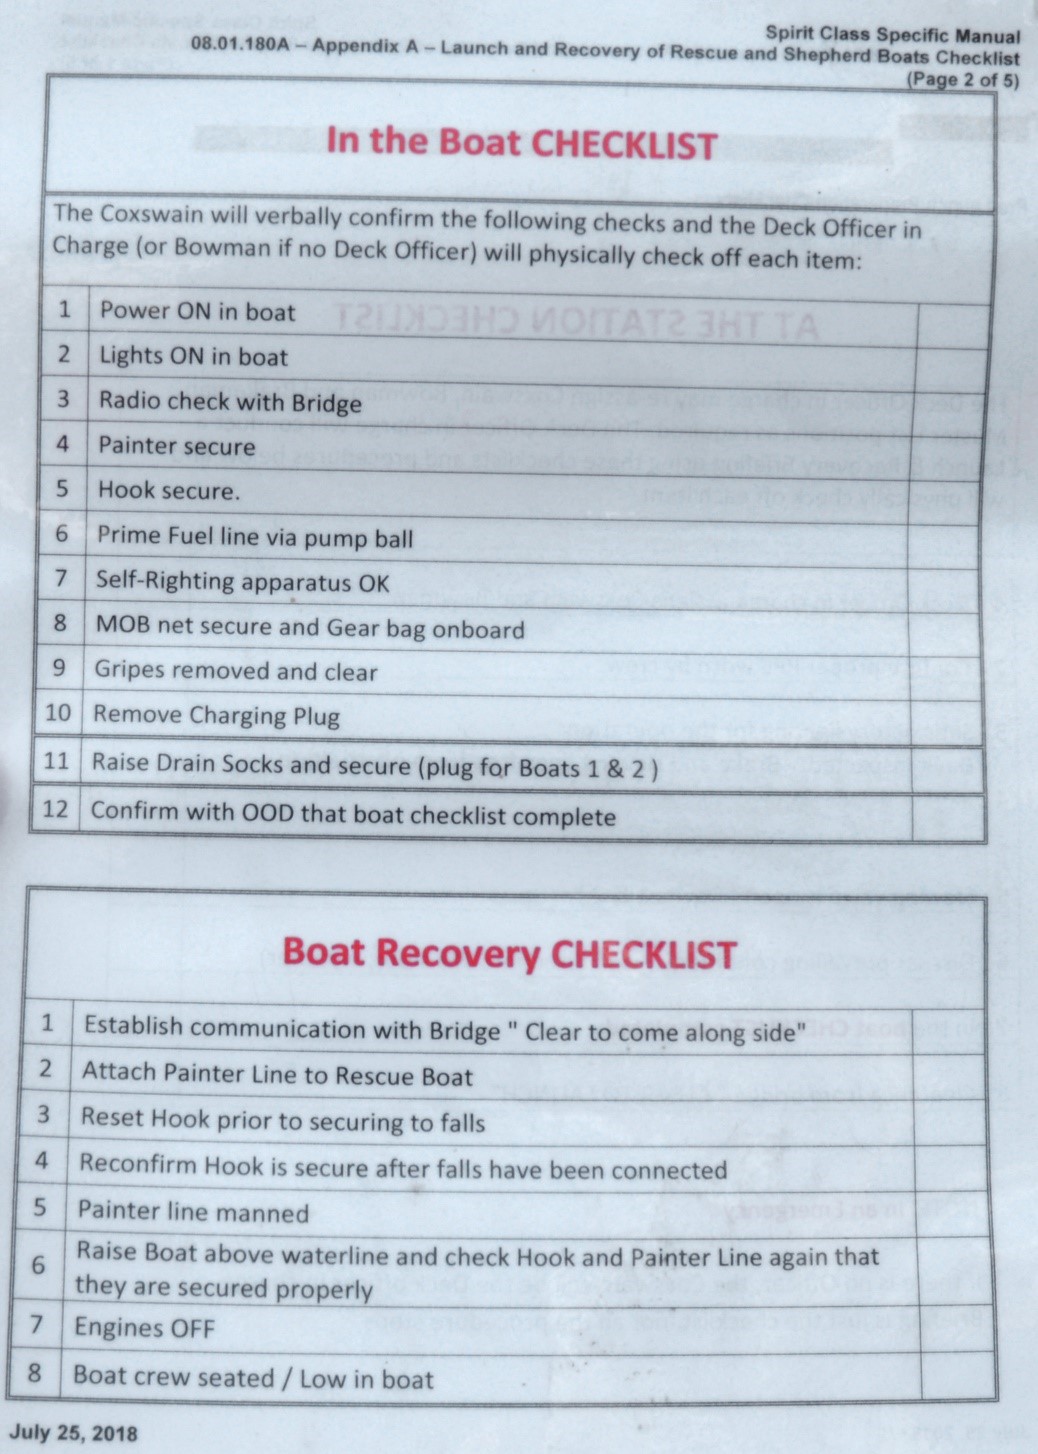 Appendix D – In the Boat checklists for the Spirit of Vancouver Island and the Spirit of British Columbia